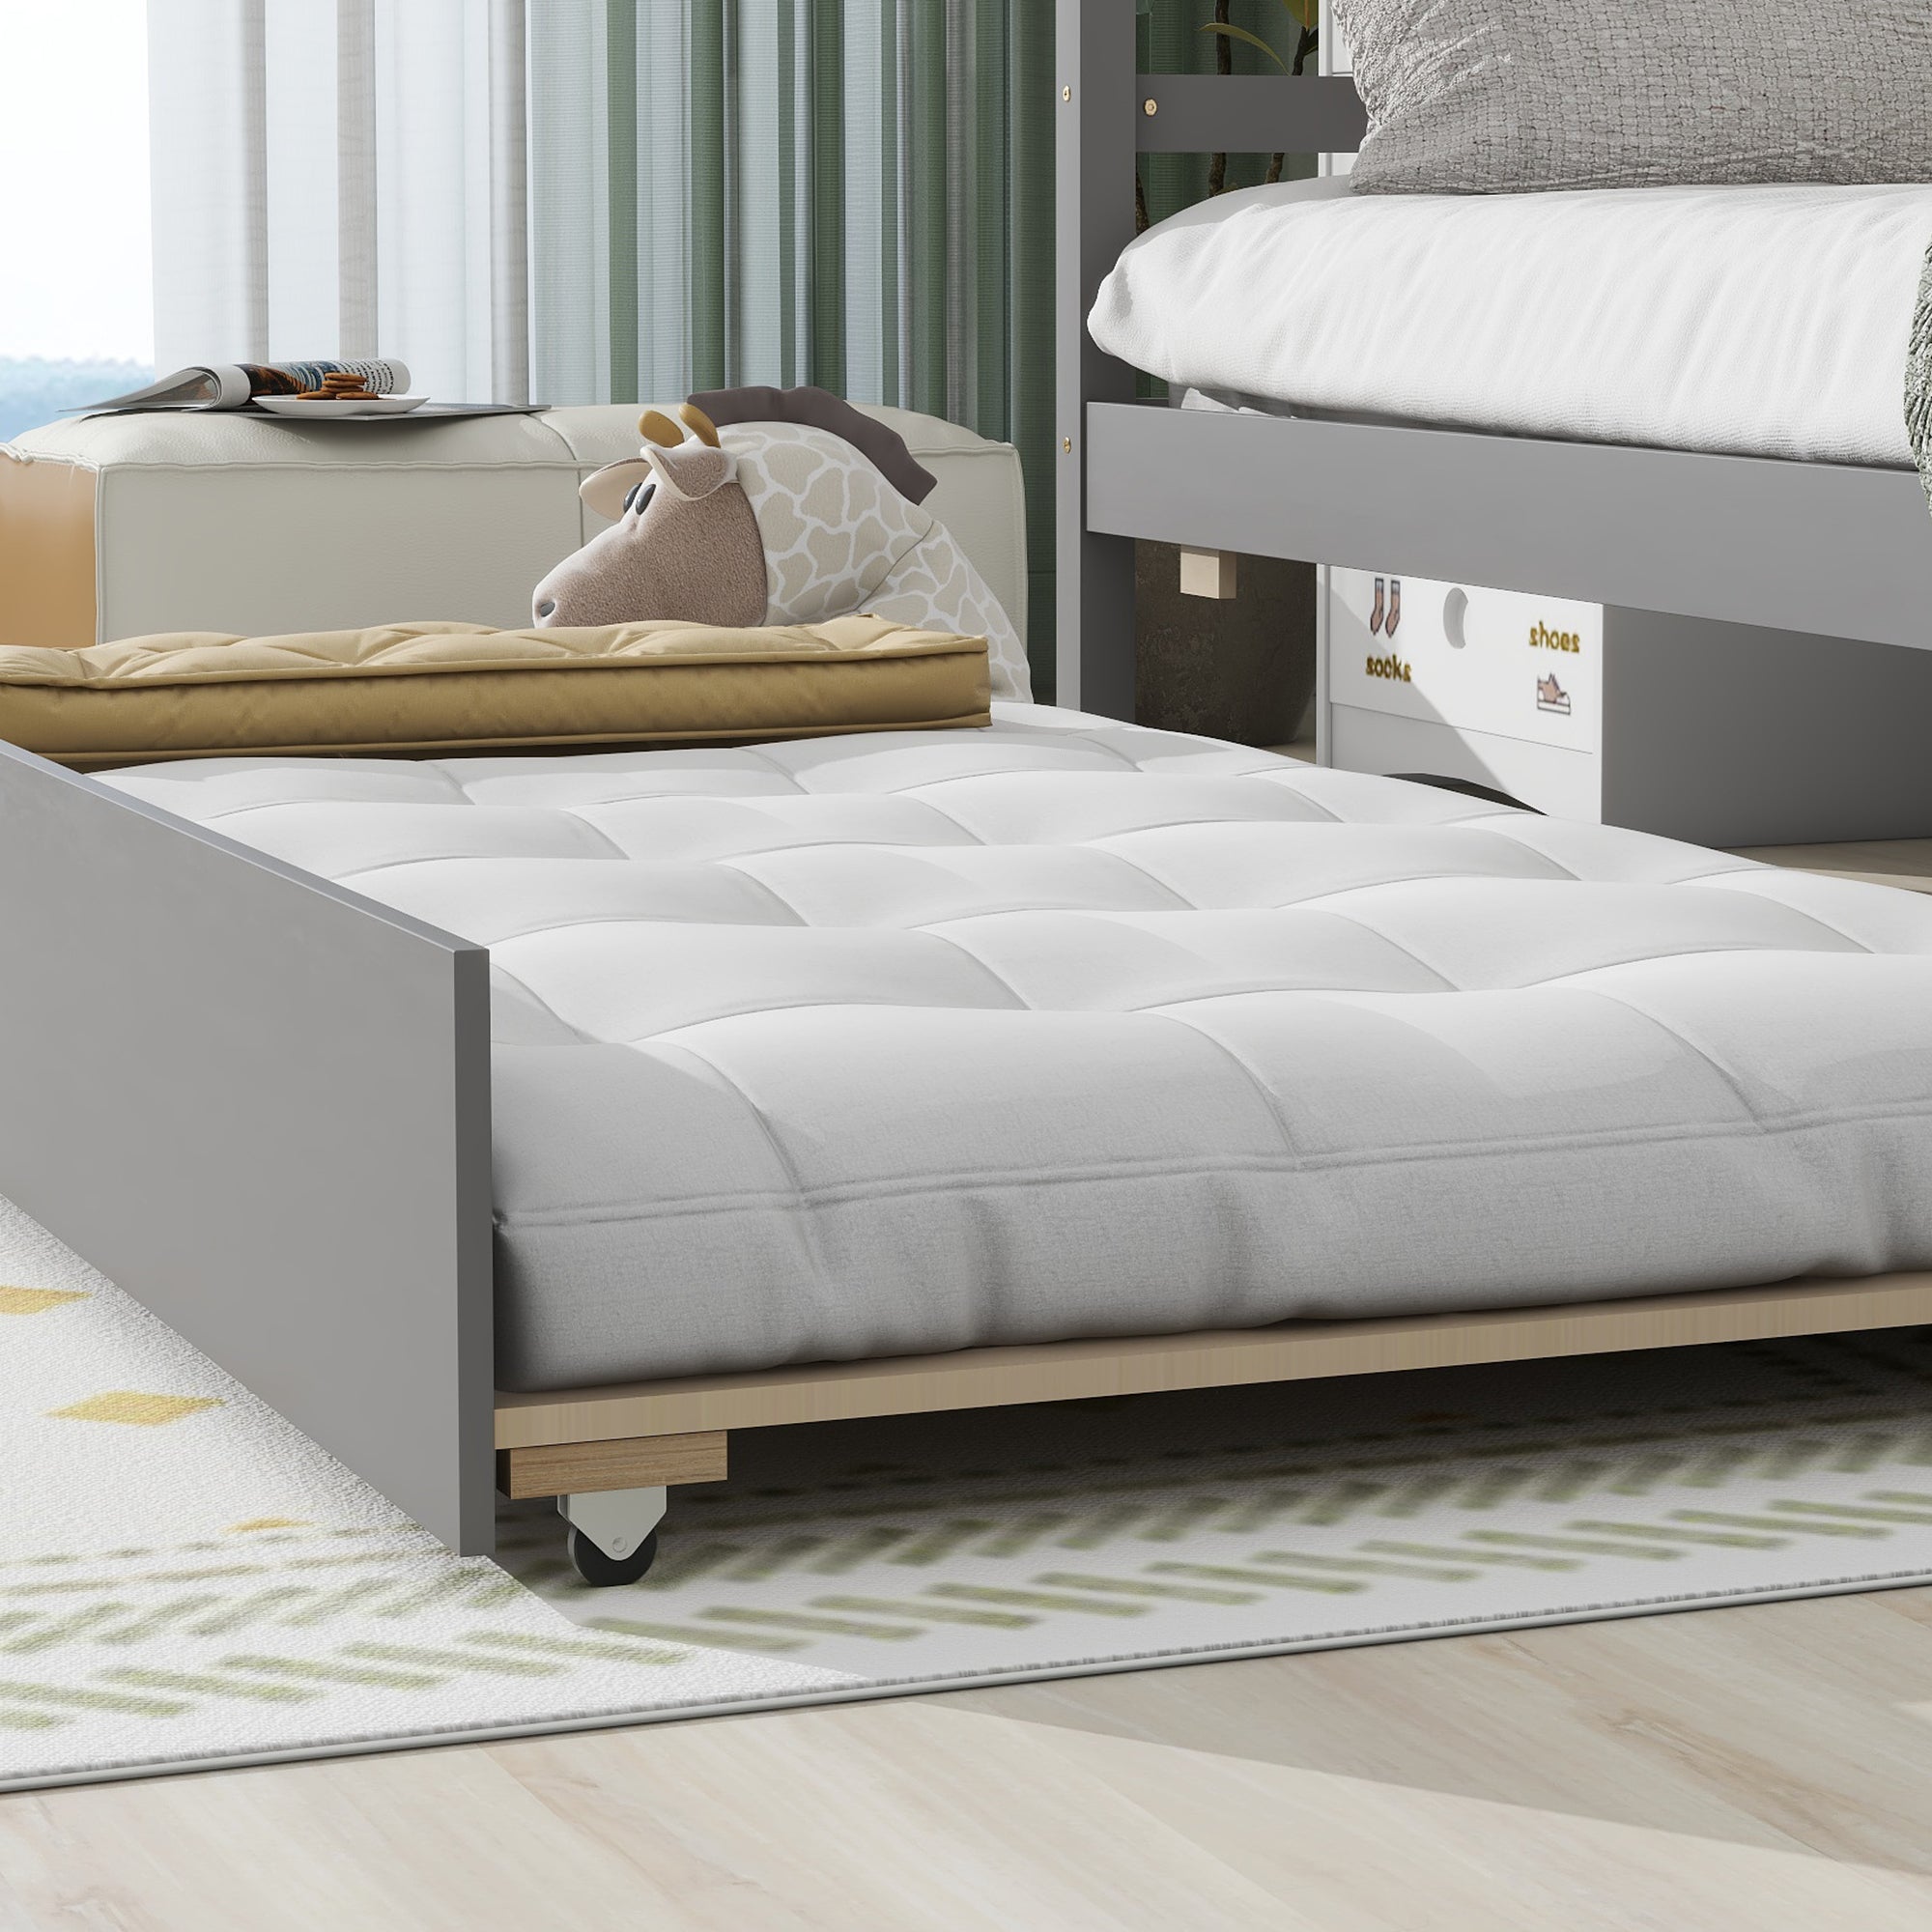 Twin House Wooden Daybed with trundle, Twin House twin-grey-wood-bedroom-american design-pine-pine